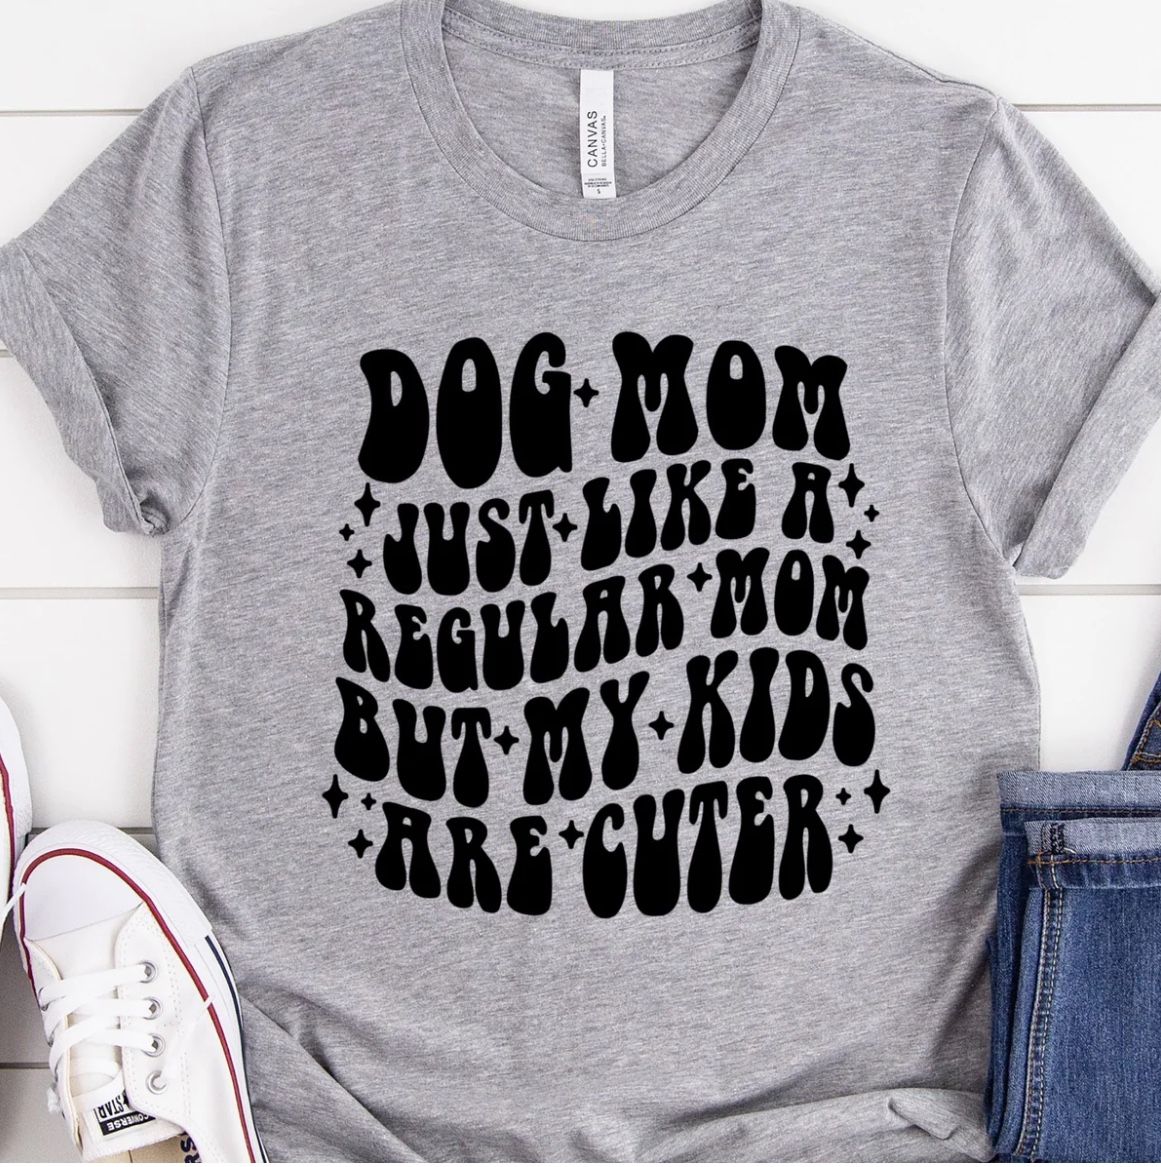 Dog Mom Just Like A Regular Mom But My Kids Are Cuter shirt Sizes S-2XL